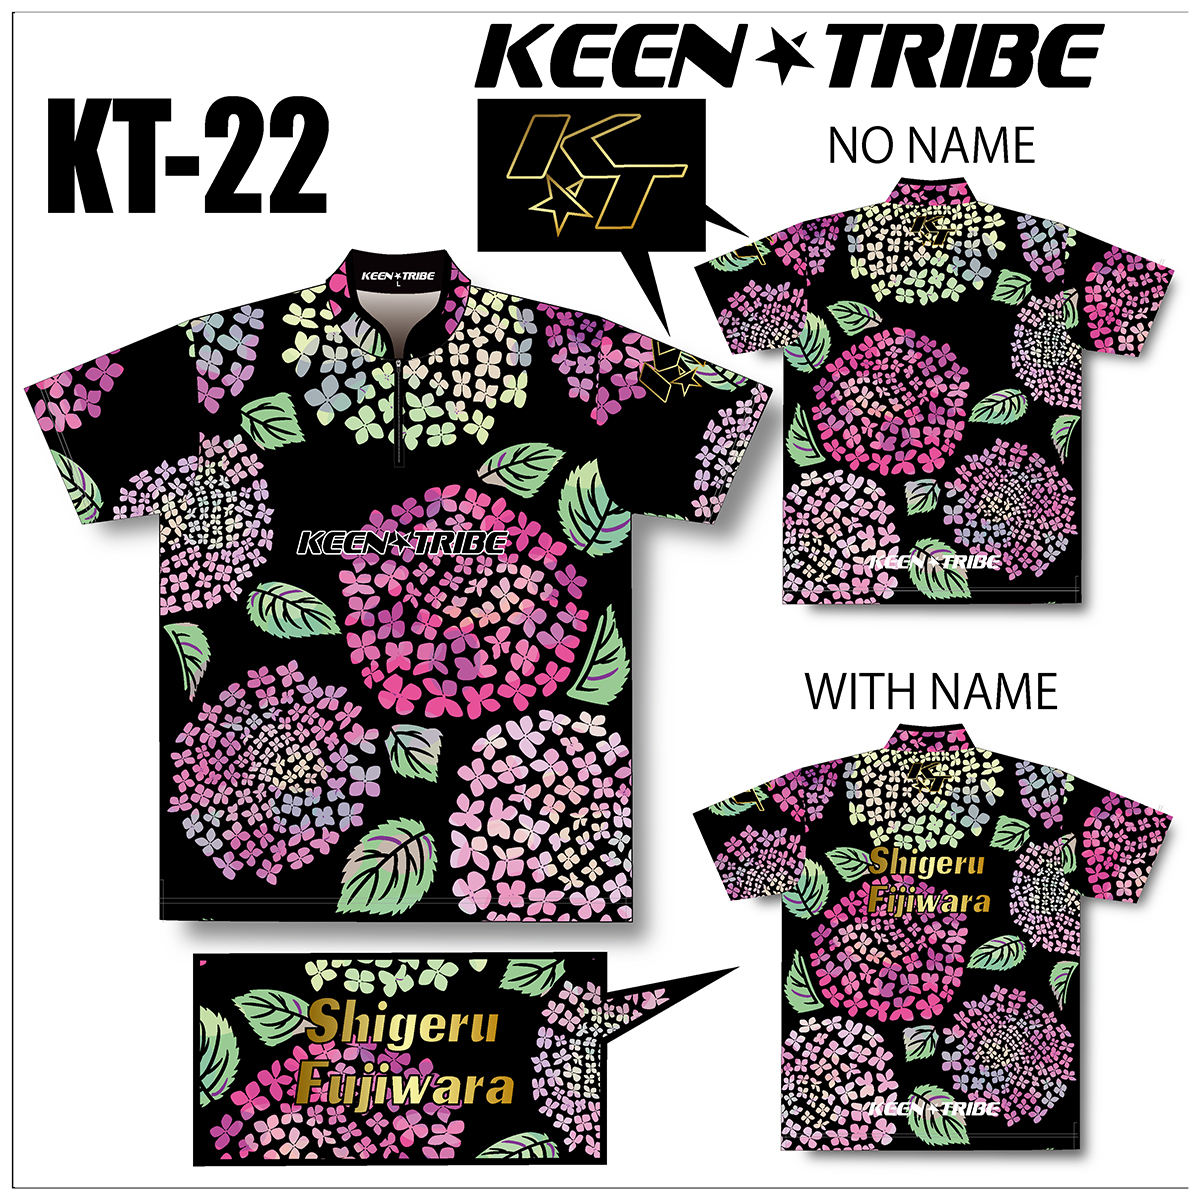 KEEN ★ TRIBE　KT-22(受注生産)